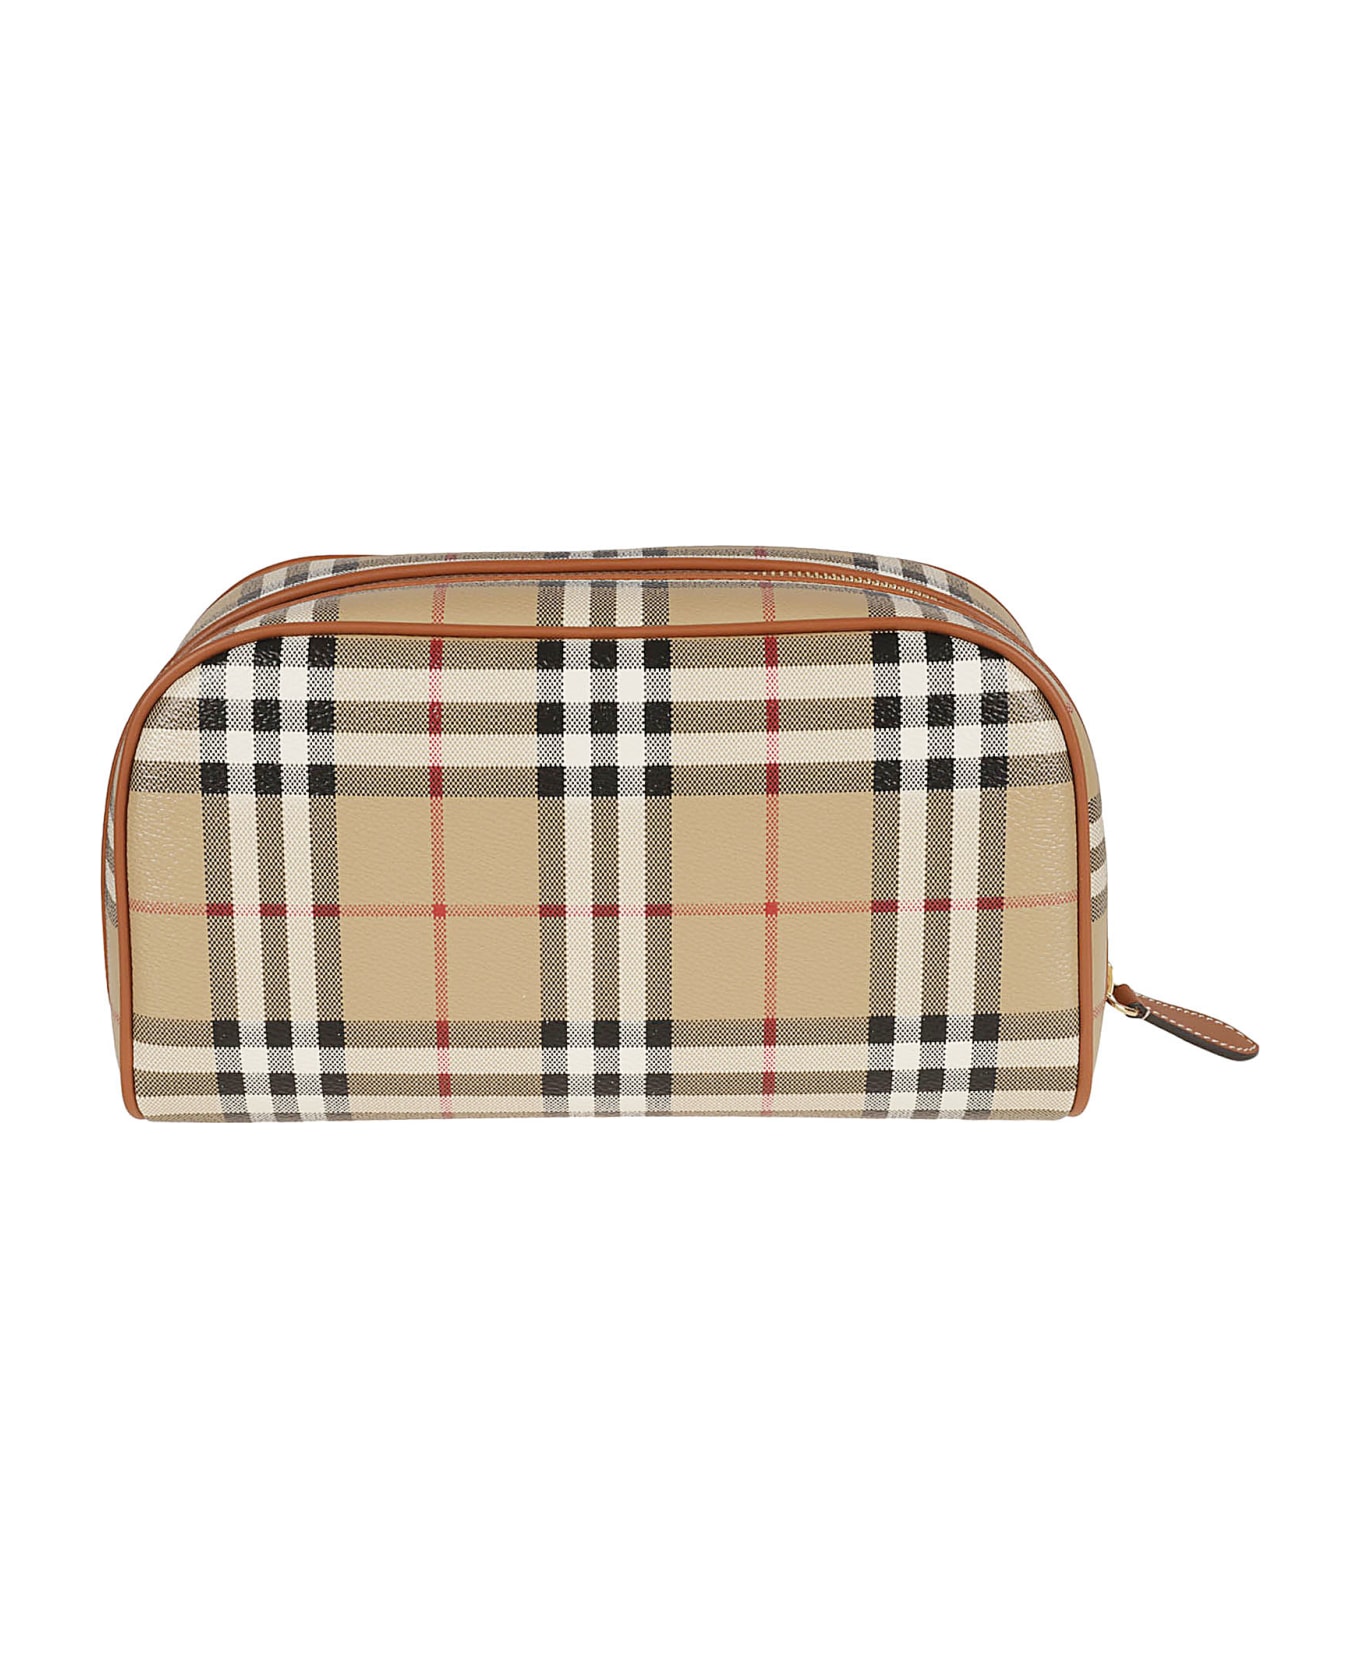 Burberry Check Logo Clutch - Archive Beige